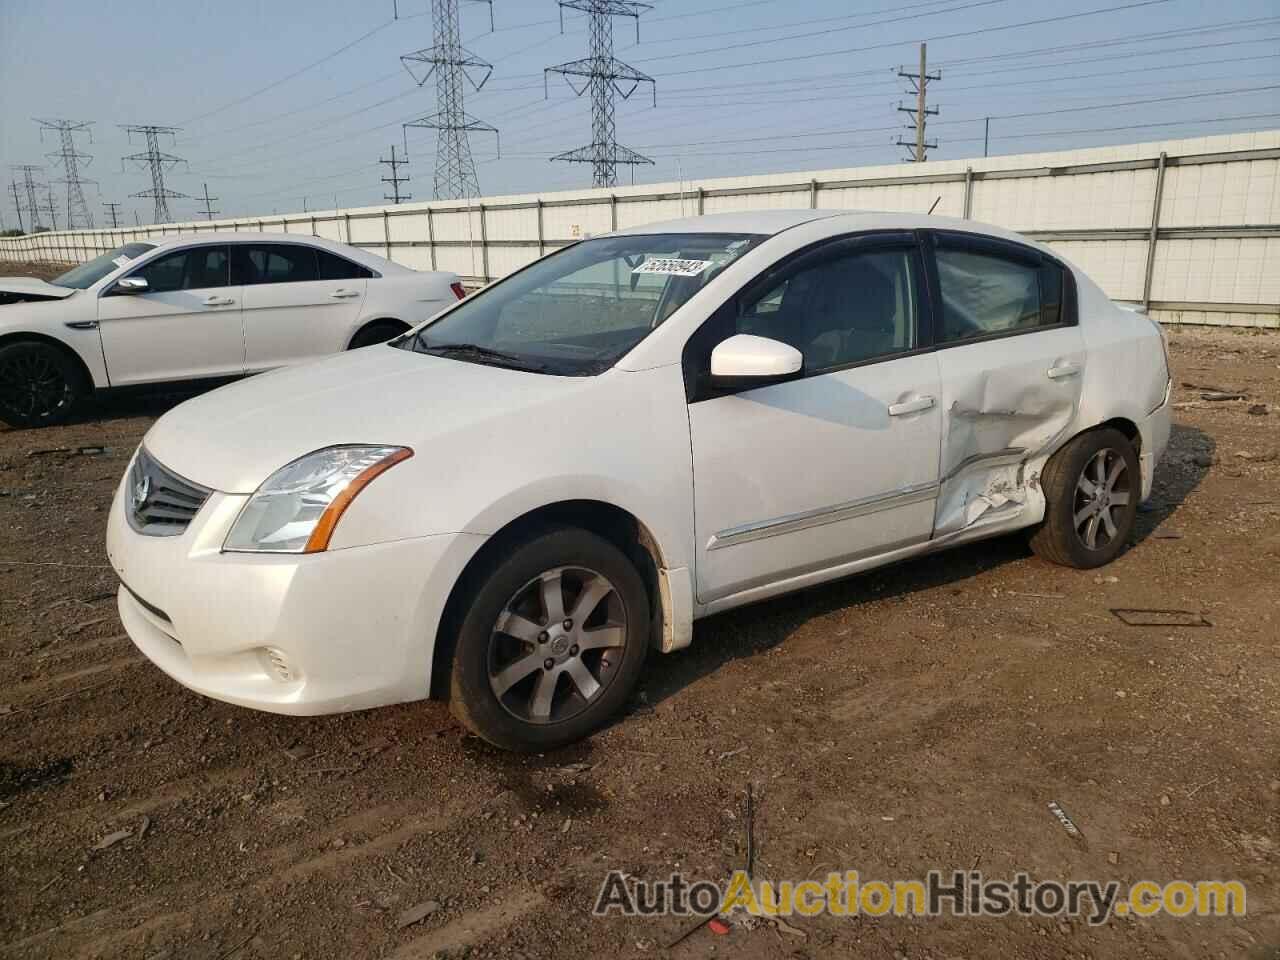 2012 NISSAN SENTRA 2.0, 3N1AB6APXCL687298